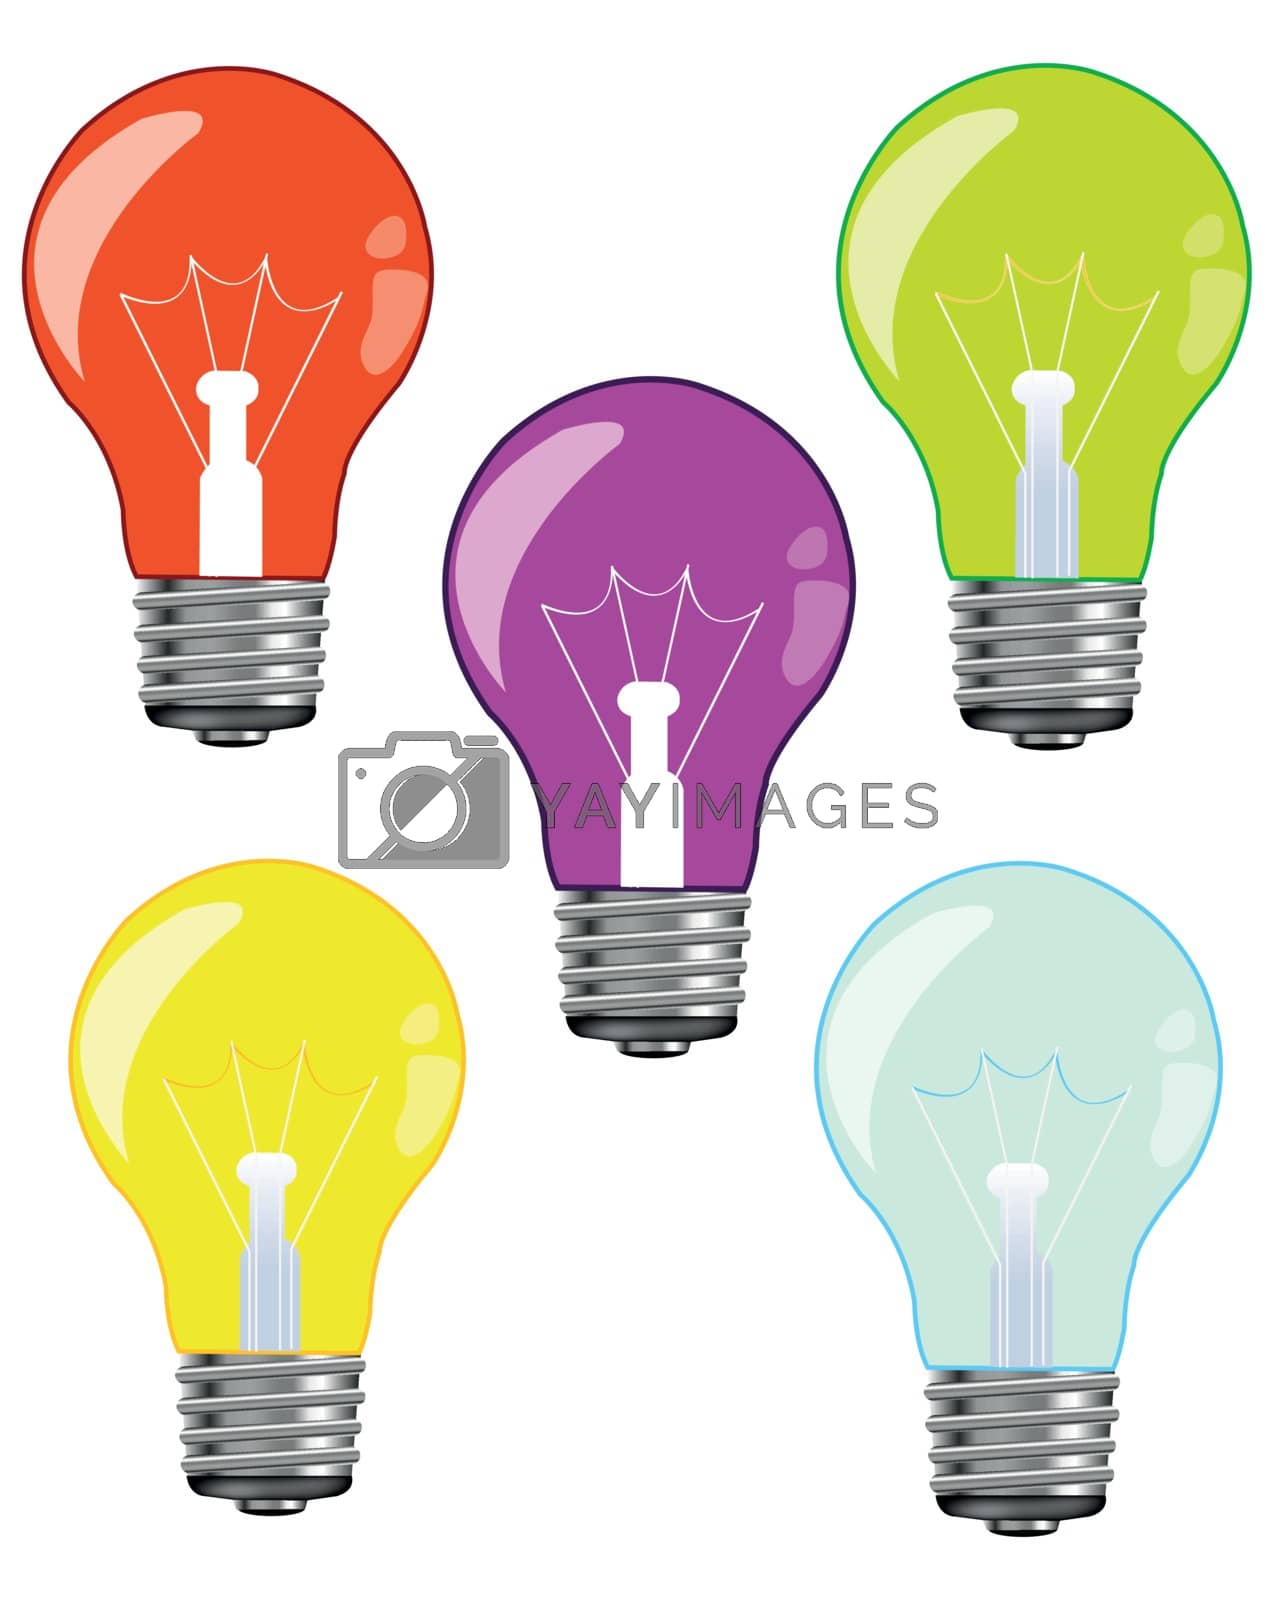 Royalty free image of Colour light bulbs by cobol1964